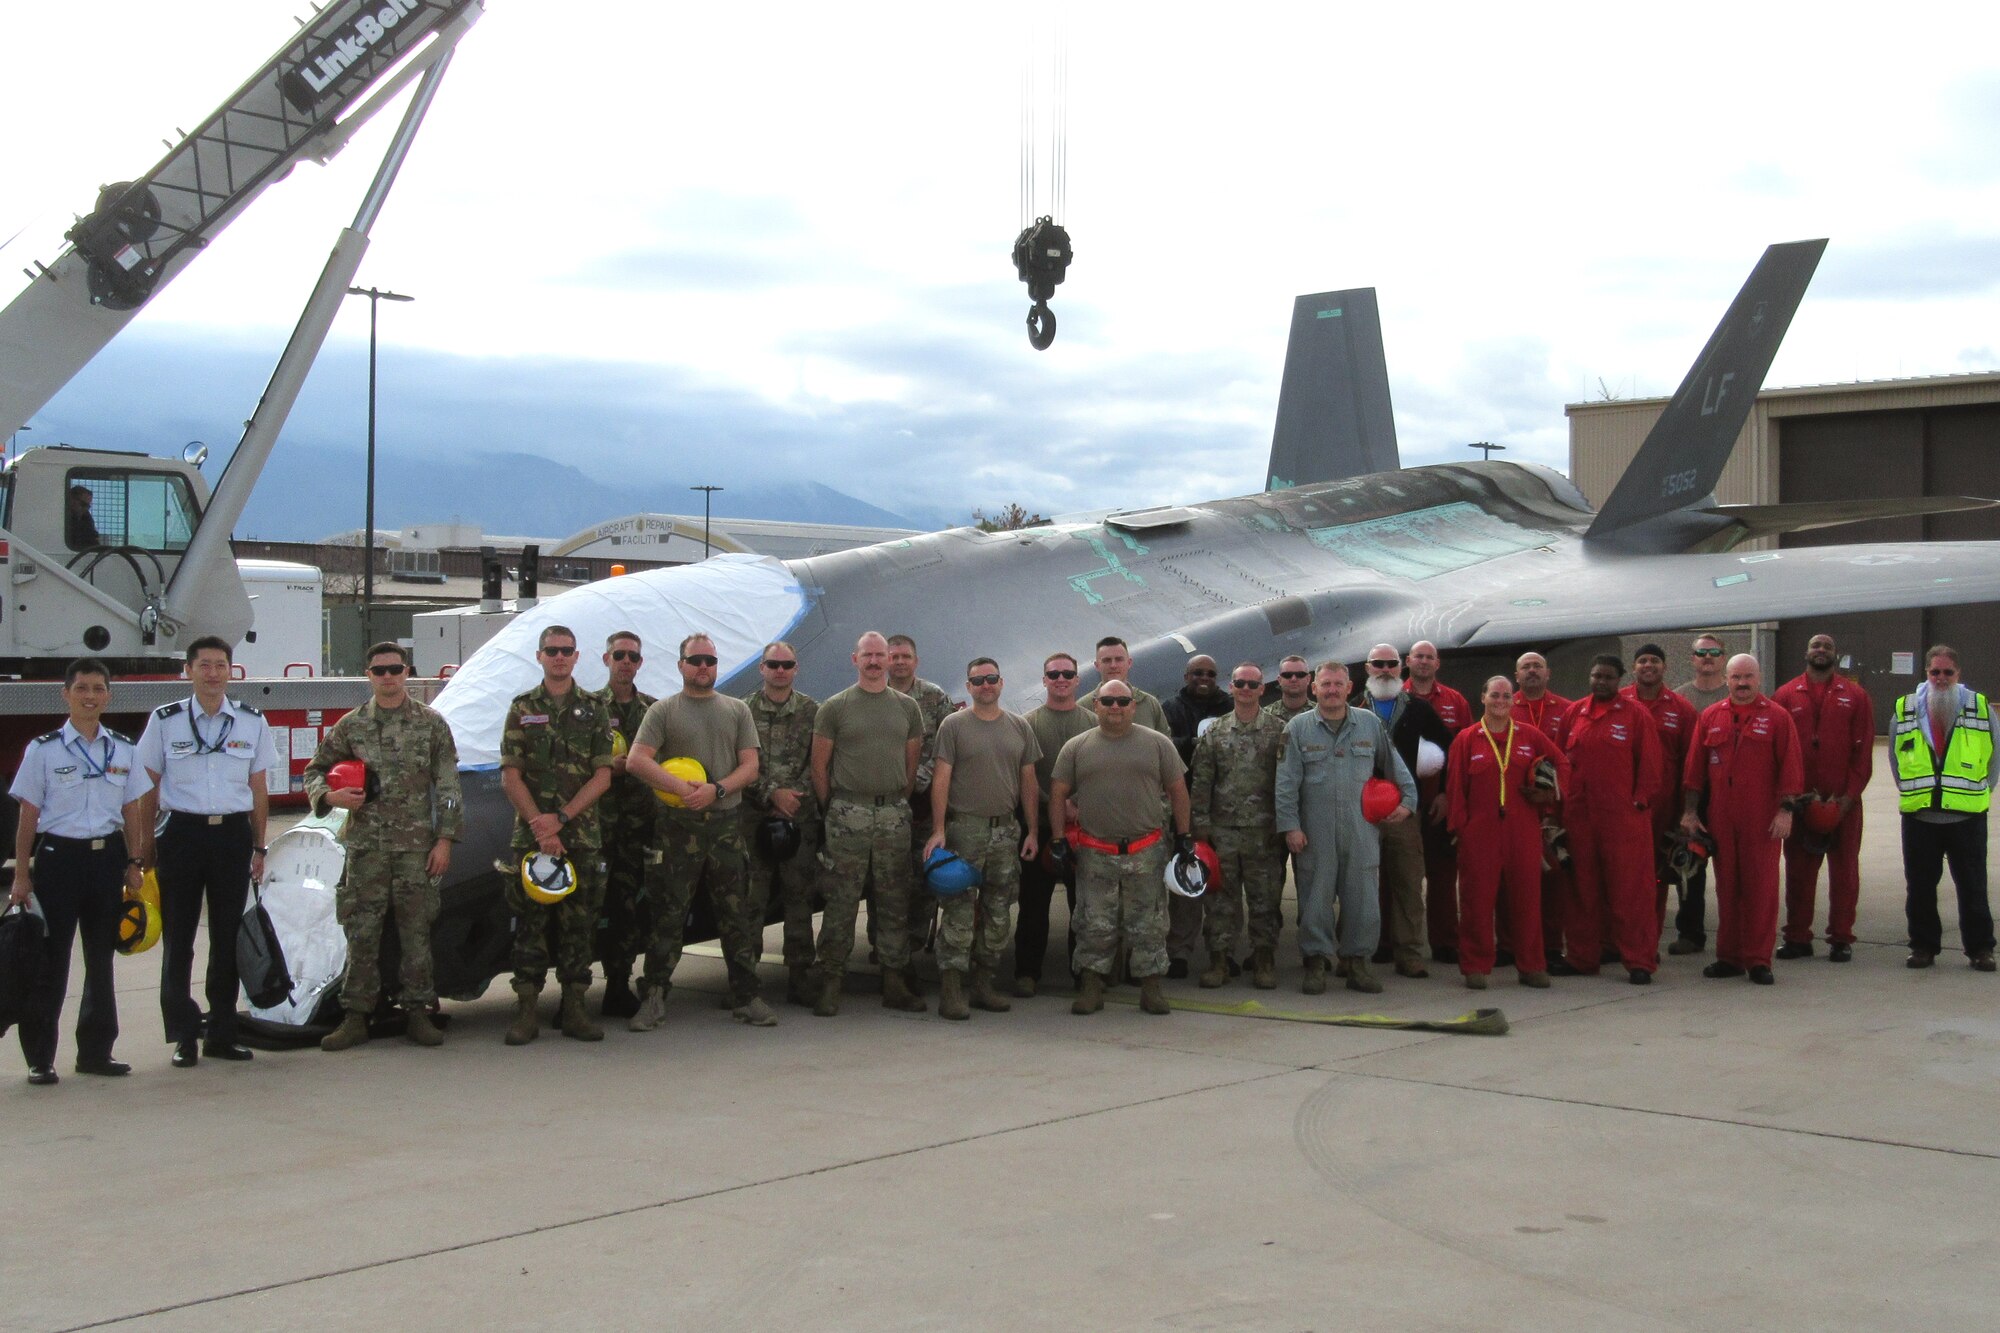 Course participants gather for a group photo in front of a reassembled F-35.